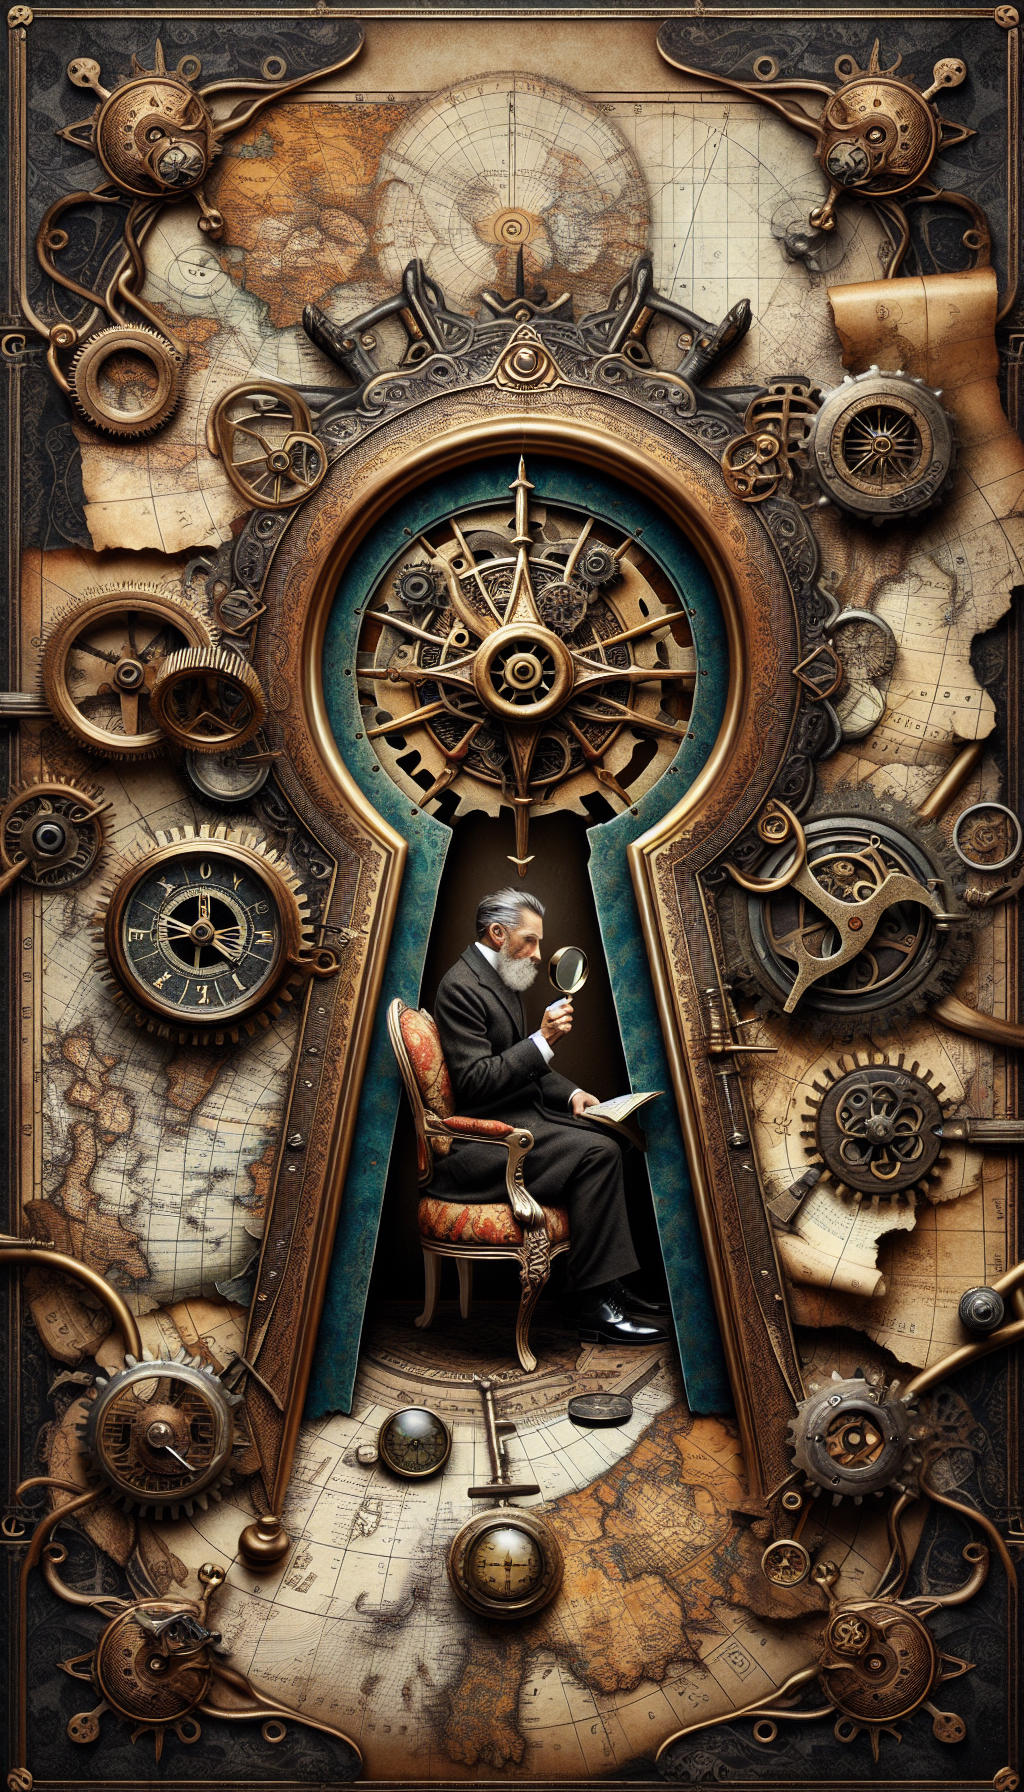 A whimsical steampunk-inspired keyhole frames an elderly expert appraiser with a magnifying glass, peering curiously at a regal antique chair. Surrounding the keyhole, ornate gears and vintage maps dotted with compass roses hint at the search for local appraisers, while a subtle overlay of digital pinpoints alludes to a modern GPS search connecting the past and present.